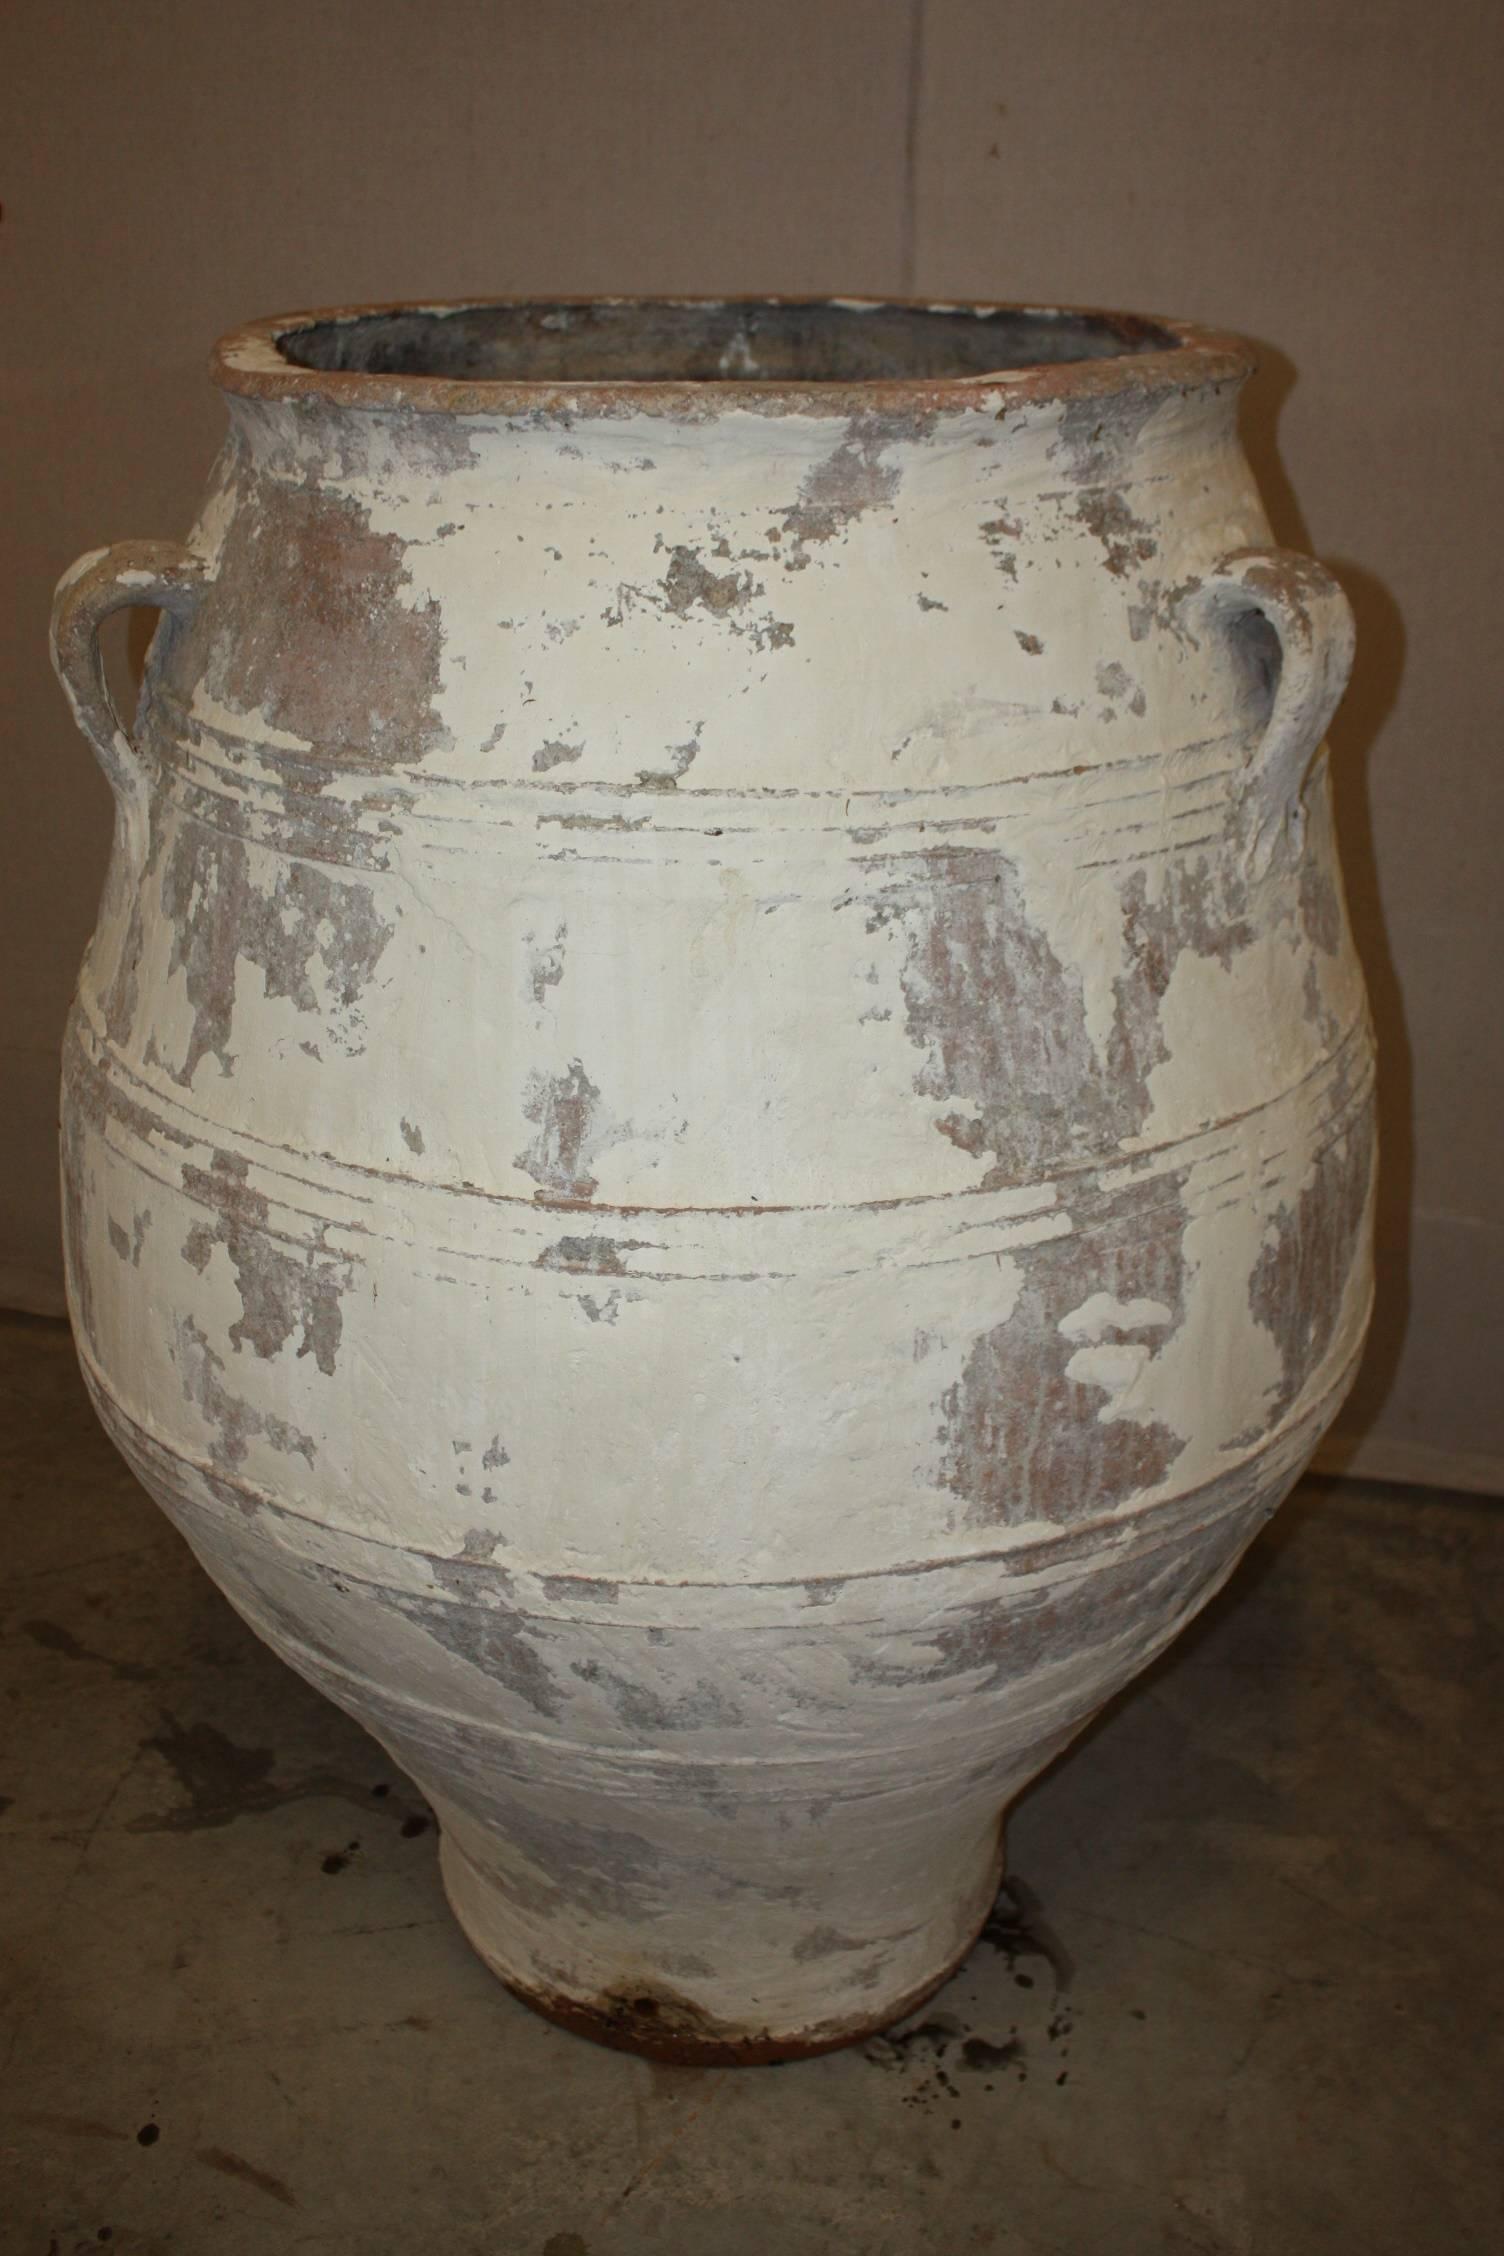 Very large Greek terracotta olive jars with antiqued white paint. We have several in stock in all sizes, shapes and colors. Large olive jars provide a wonderful architectural feature to outdoor gardens and landscape. Also could be used as a planter